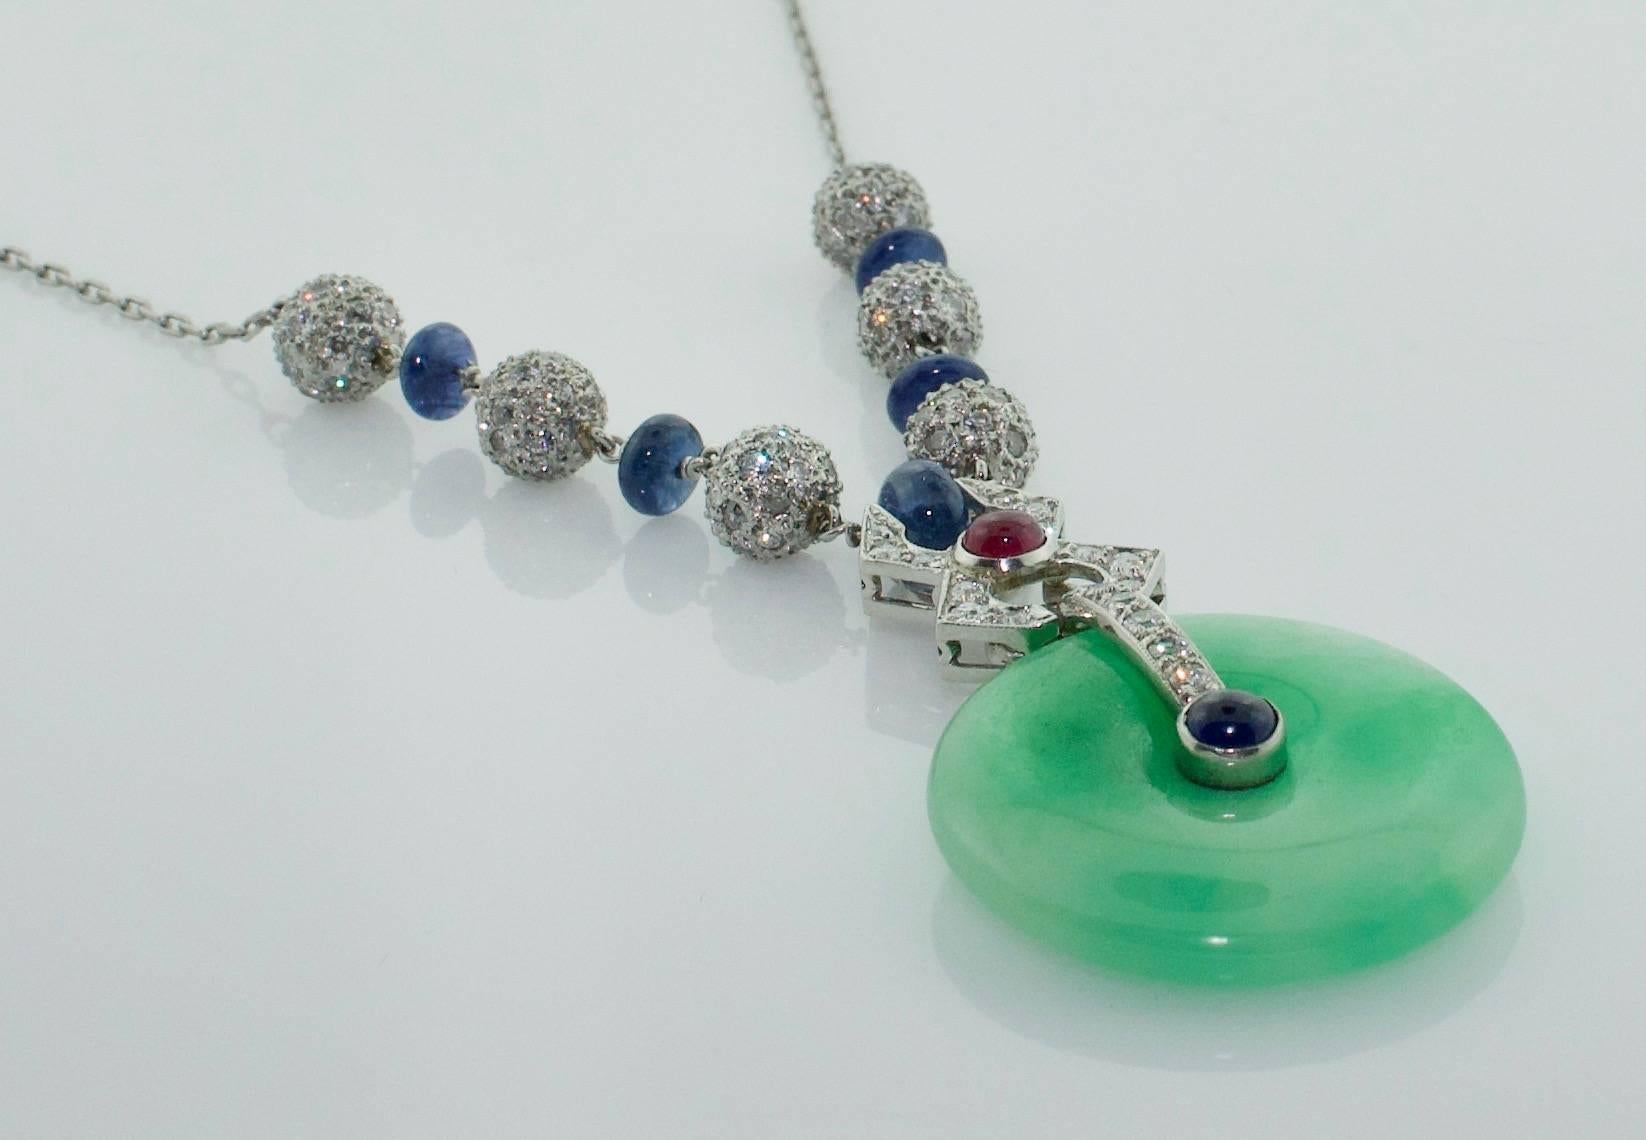 Jadeite, Diamond, Ruby and Sapphire  Necklace
A beautiful Jadeite Disk is The Focal Point of This Spectacular Necklace
With Sapphire Ron-dells and a Cabochon  Ruby and Sapphire 
3.55 carats of Old European Cut  Diamonds color GH clarity VS-SI1 

